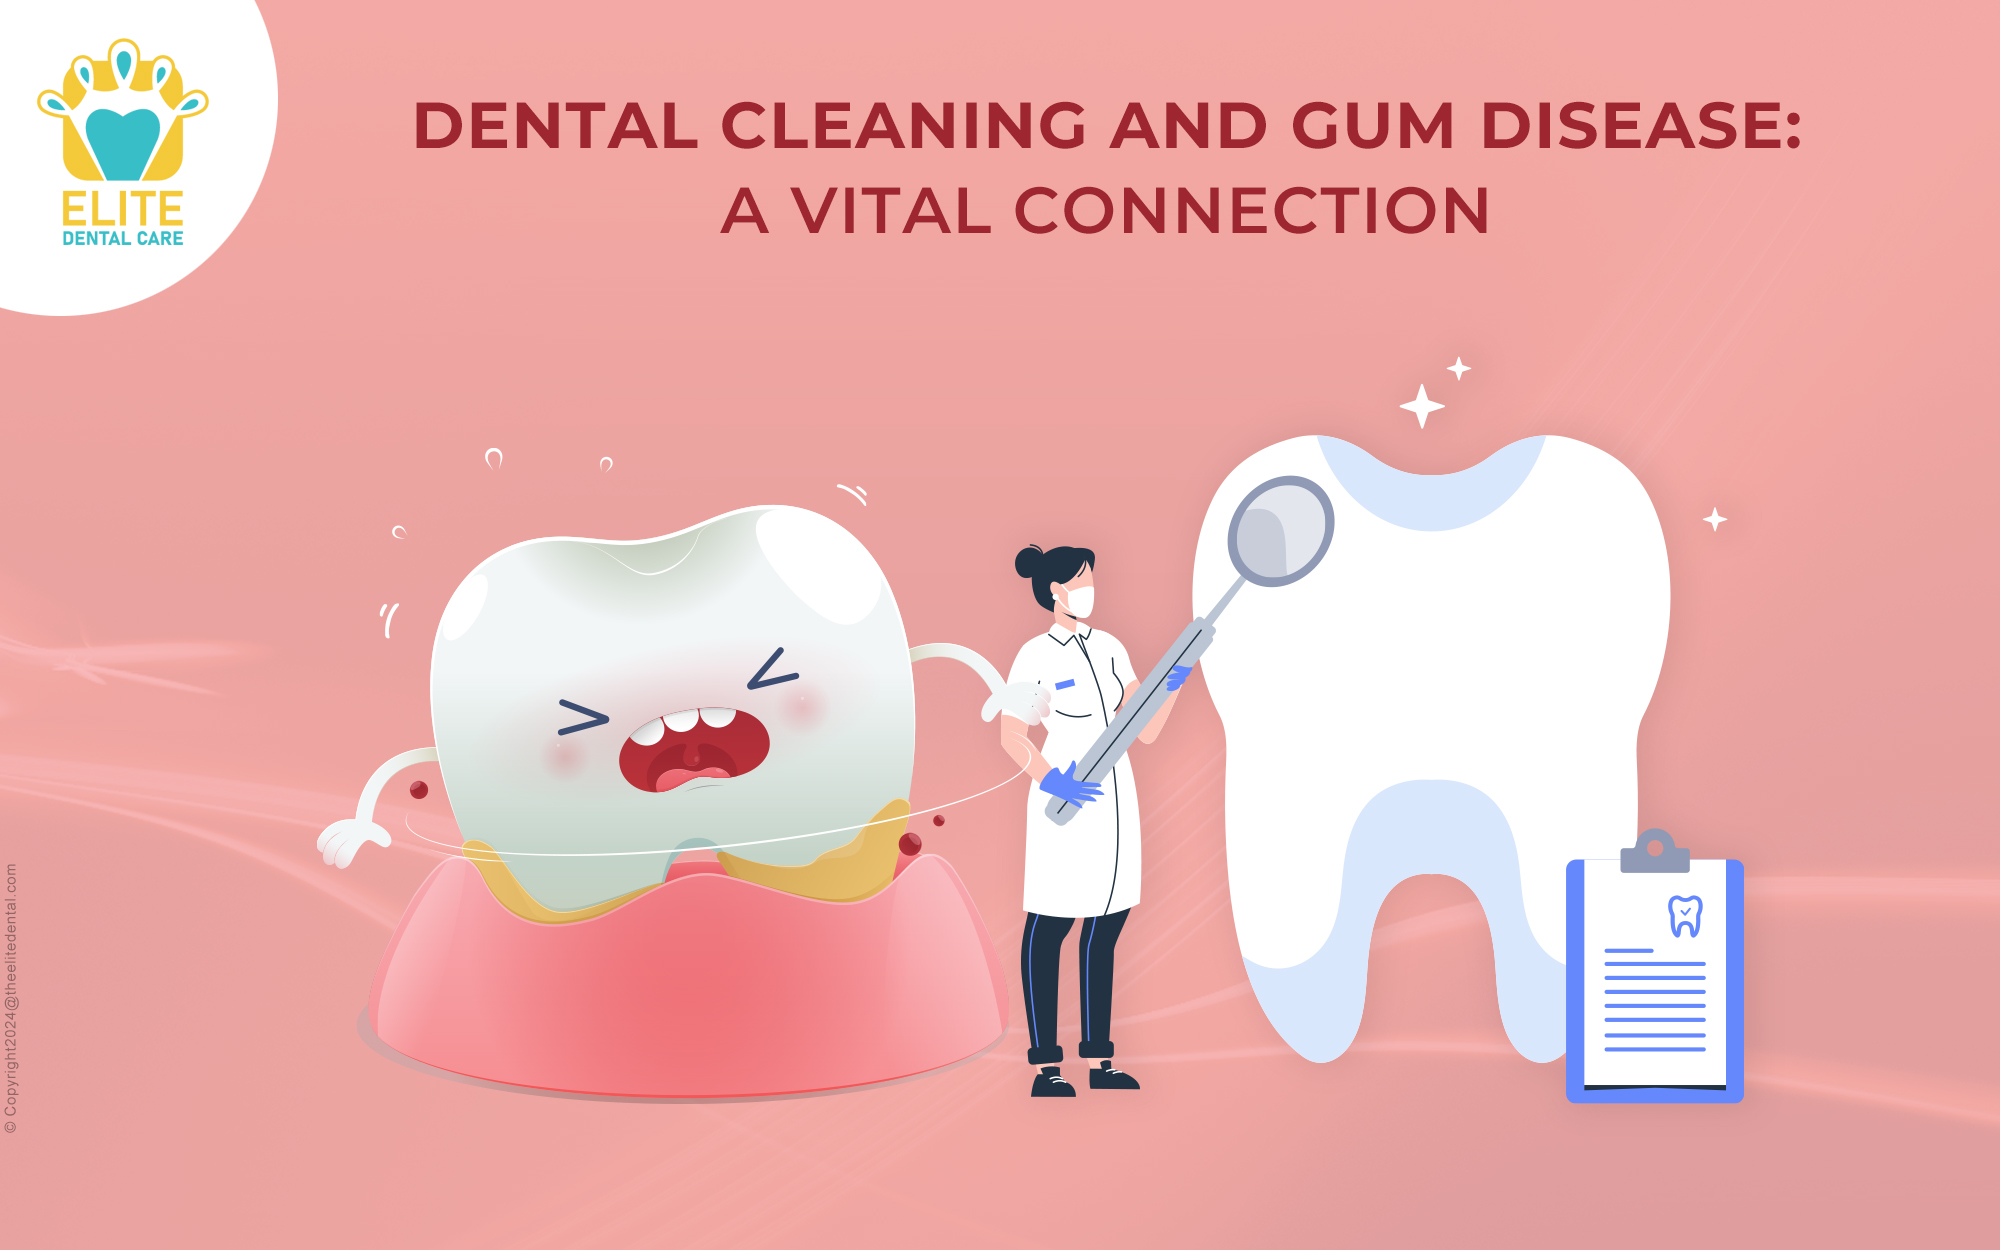 Dental Cleaning and Gum Disease: A Vital Connection